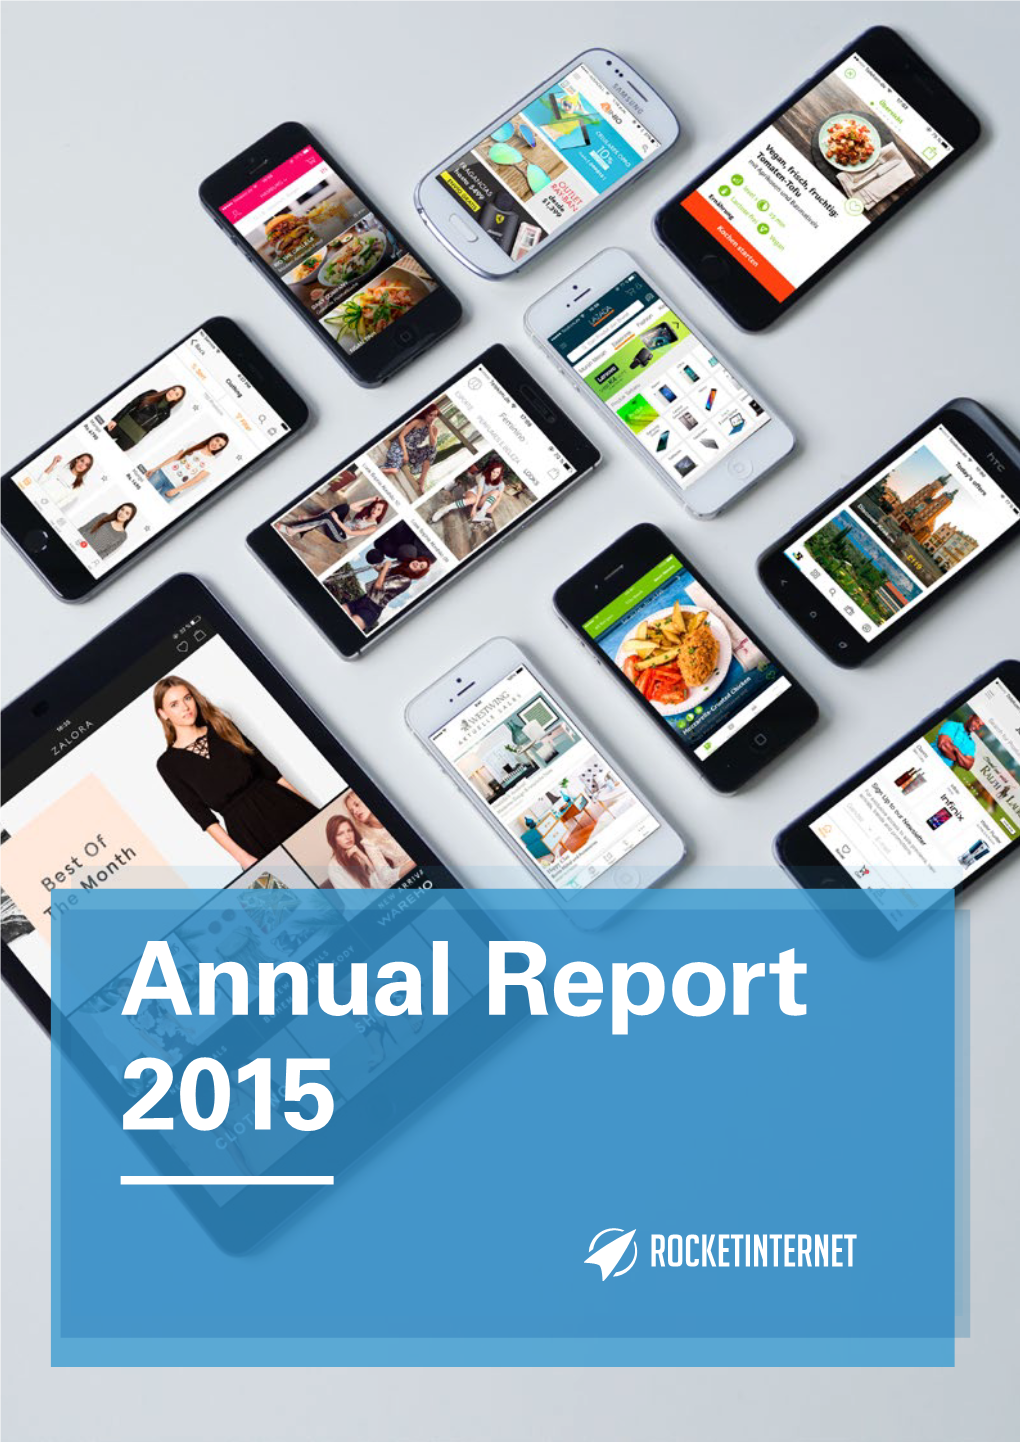 Annual Report 2015 Key Figures